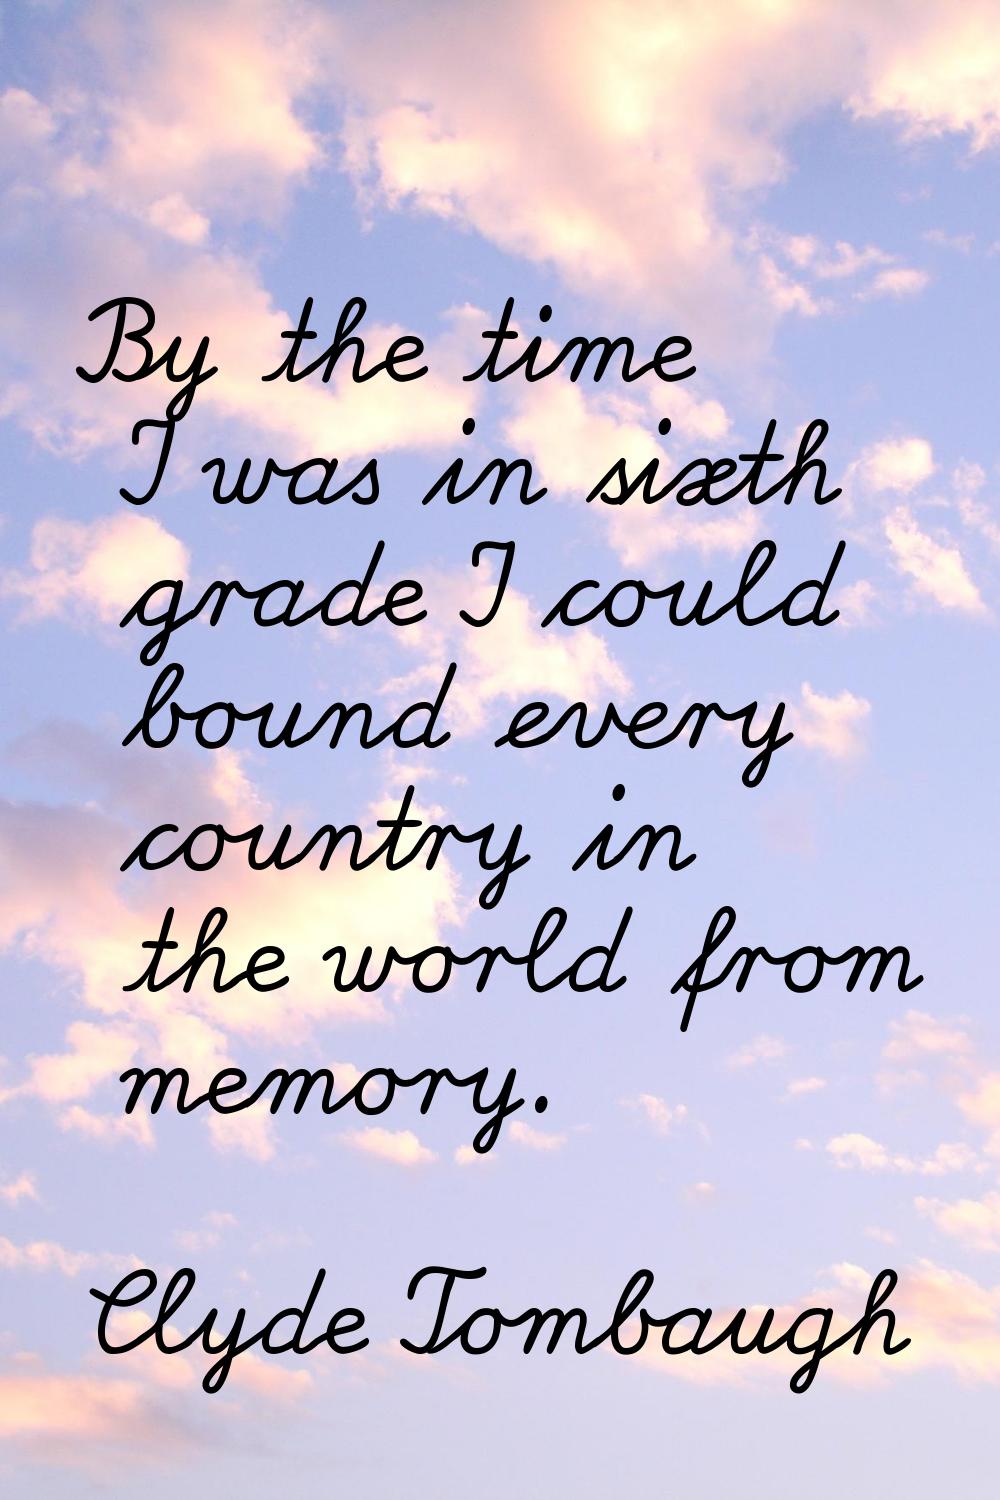 By the time I was in sixth grade I could bound every country in the world from memory.